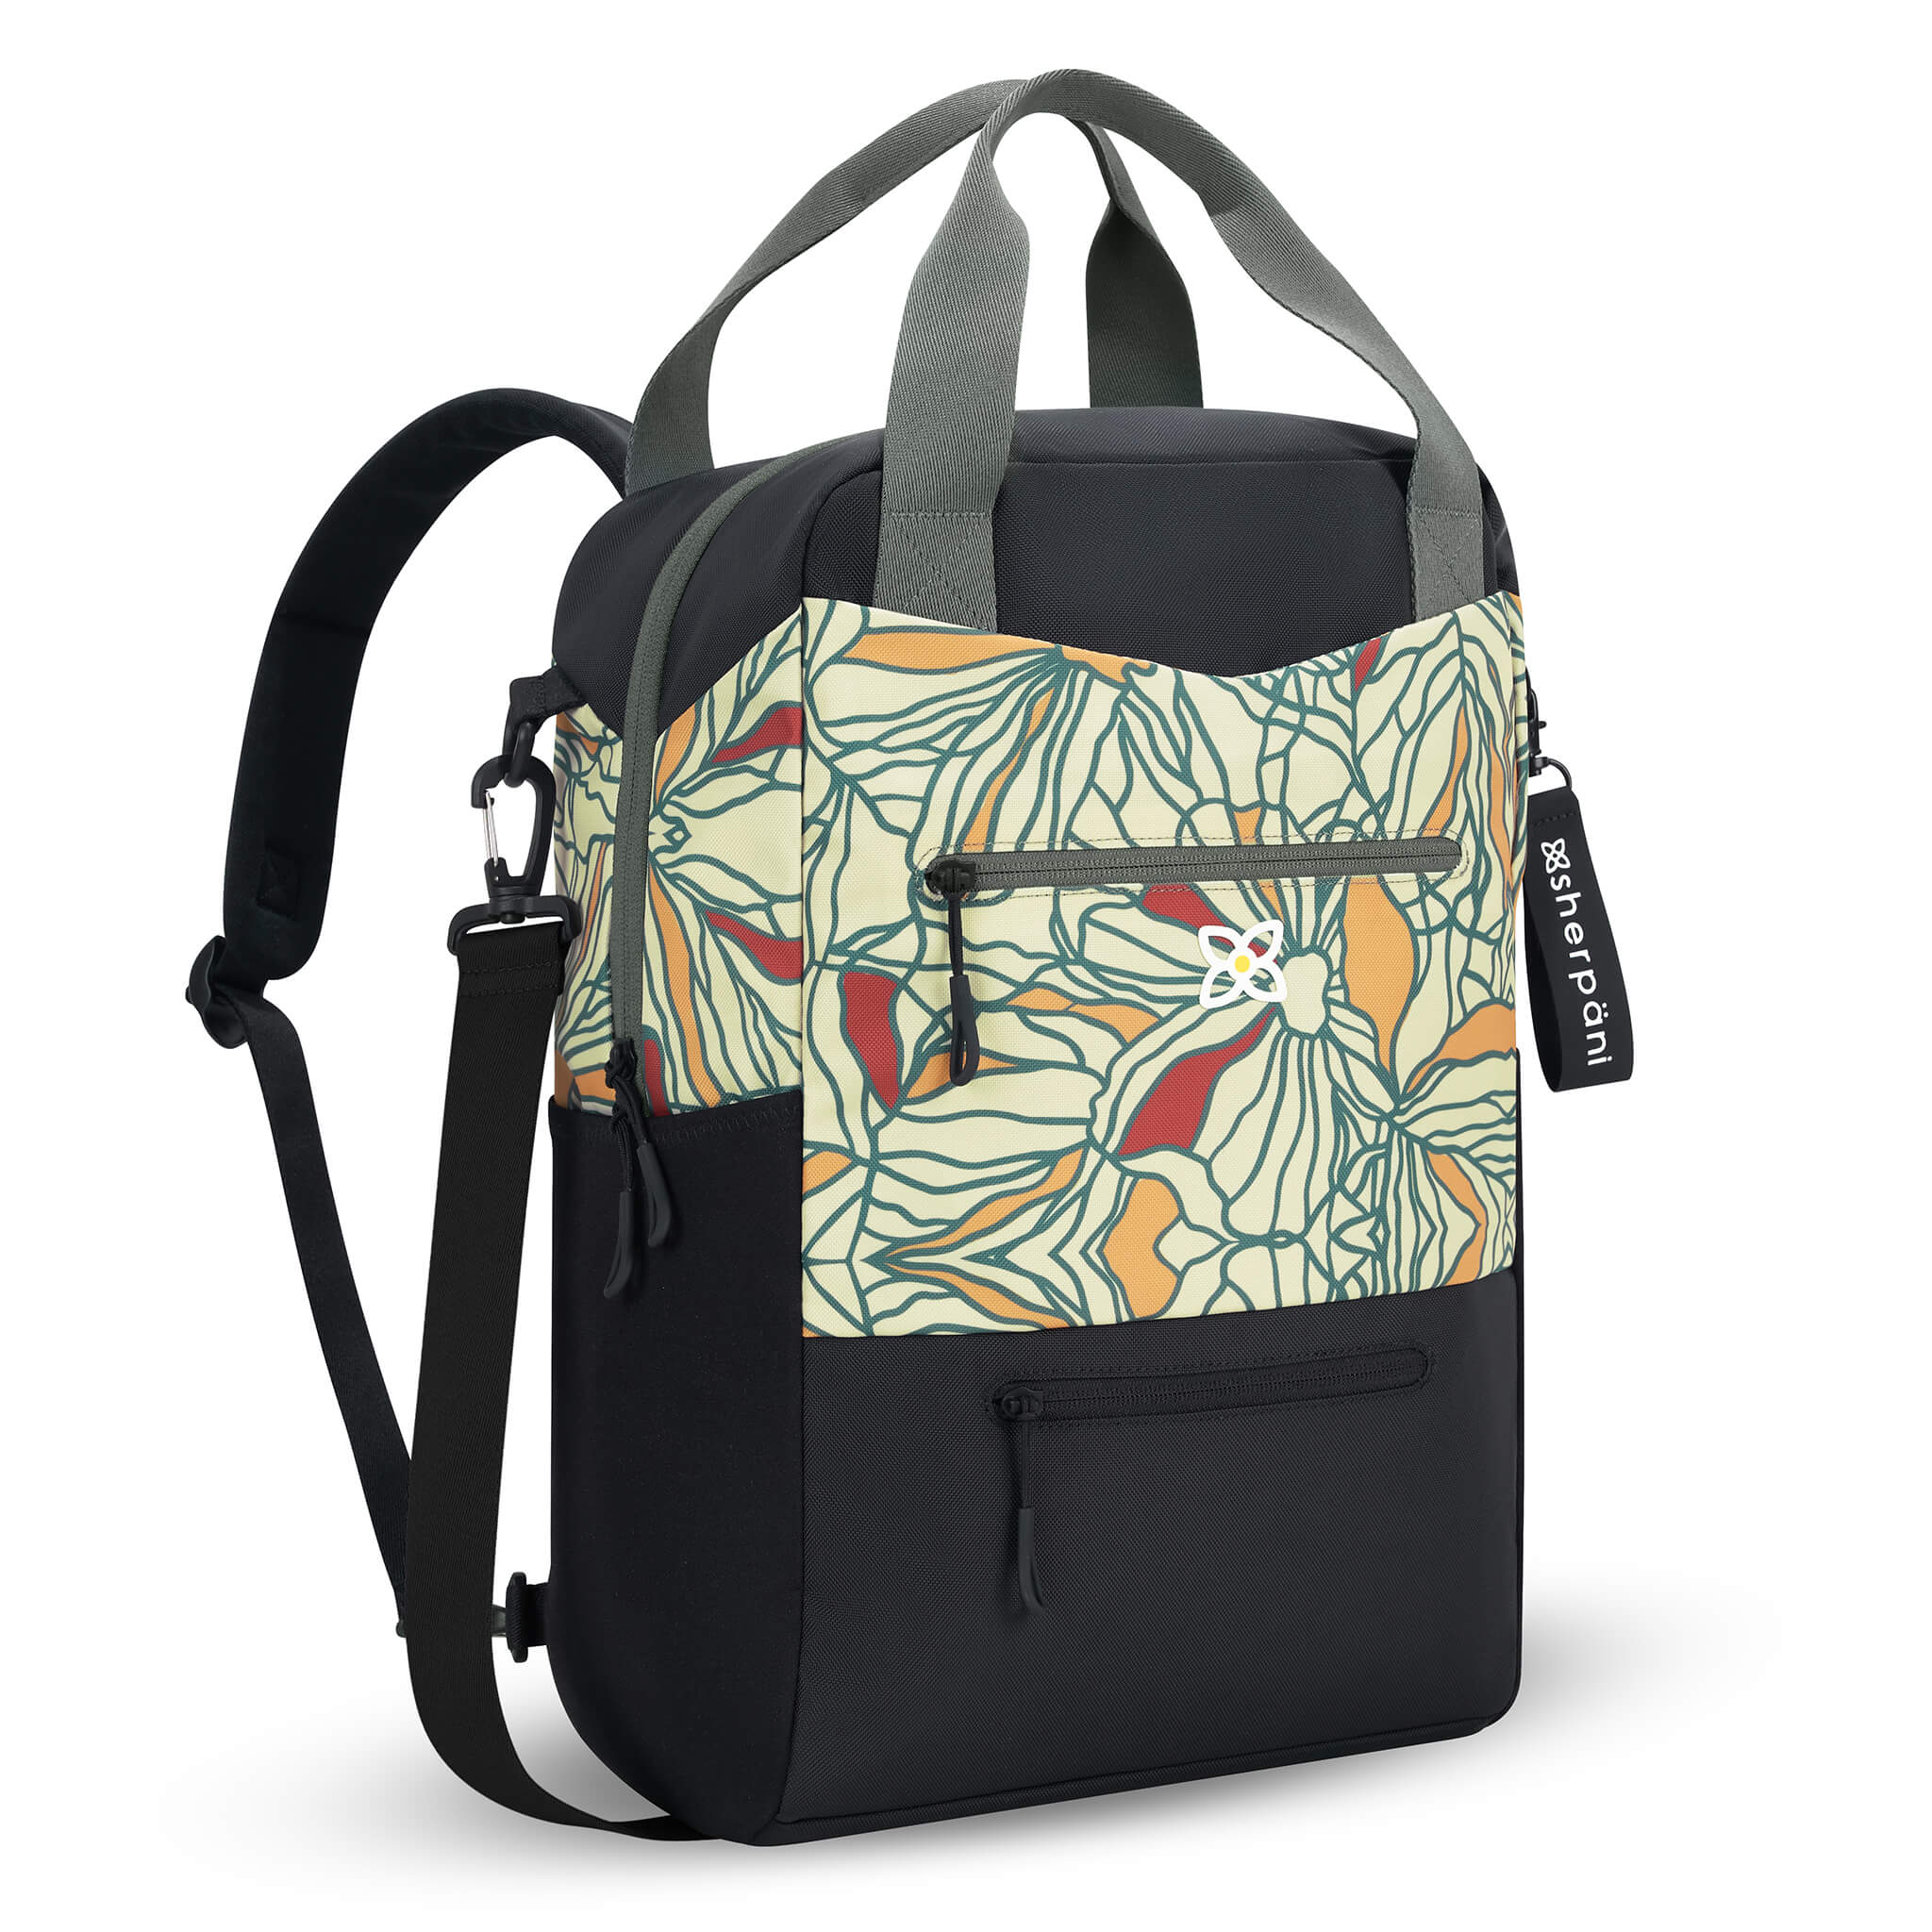 Angled front view of Sherpani convertible travel bag, the Camden in Fiori. Camden features include adjustable backpack straps, adjustable crossbody strap, tote bag handles, upper zipper pocket, lower zipper pocket, padded laptop sleeve, three water bottle holders and luggage pass through feature. The Fiori colorway is two-toned in black and a floral pattern in neutral colors with red accents. 